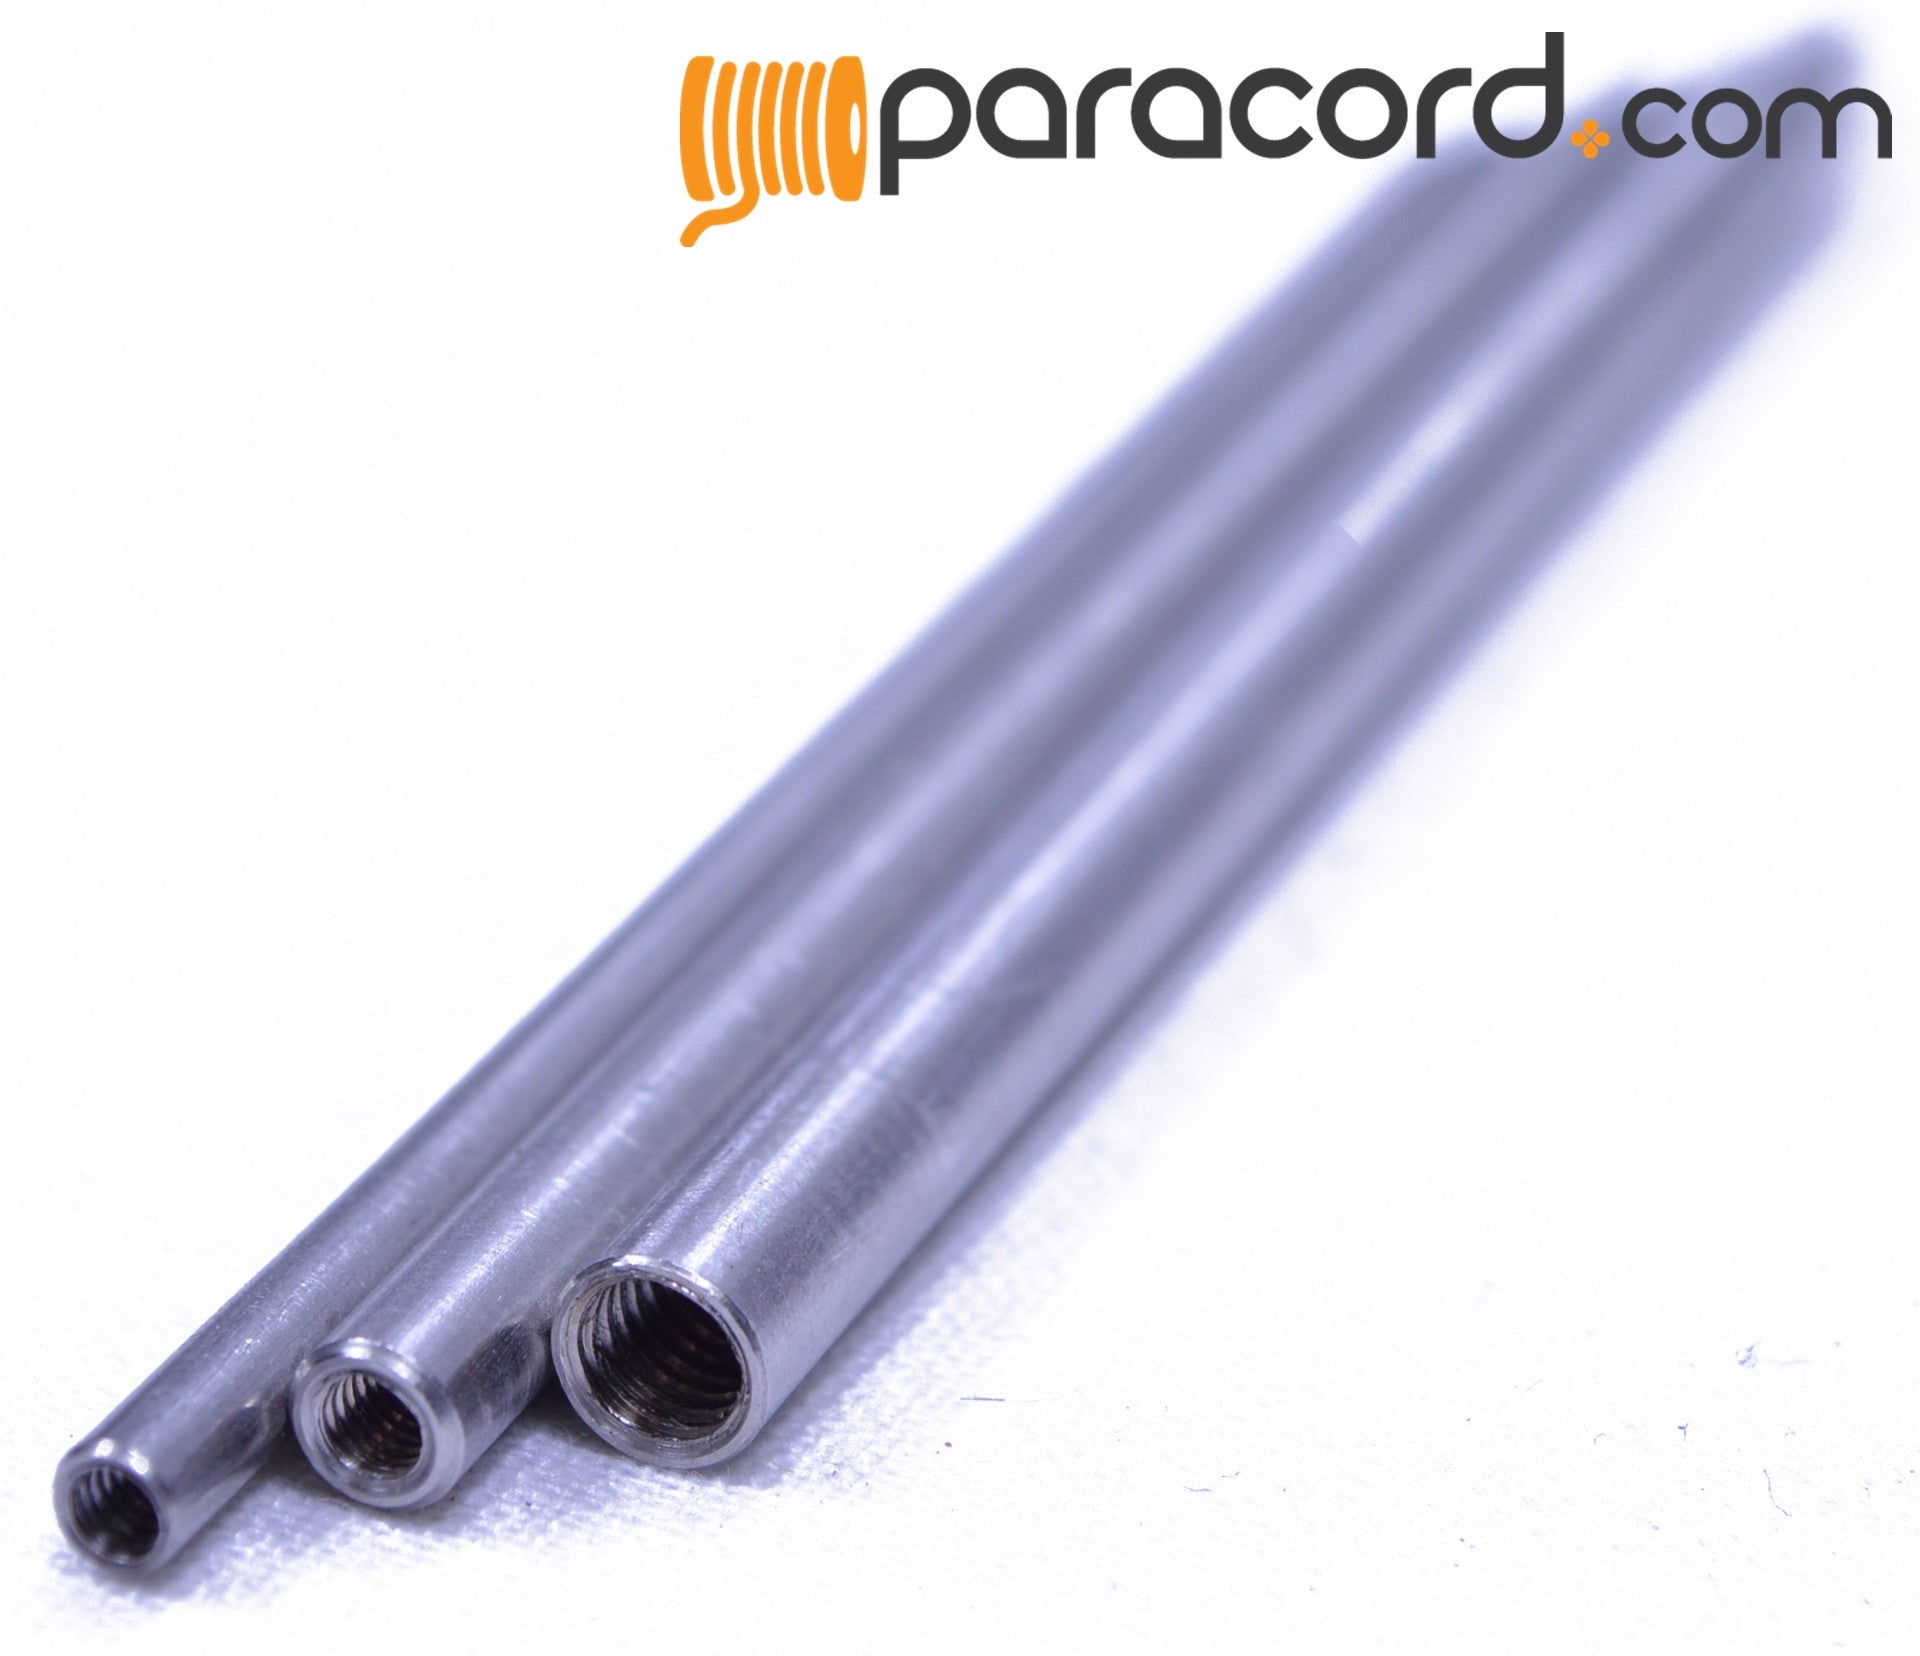  3.5 Micro Fids for Micro Cord/Leather Work - Stainless Steel  Paracord Lacing Needles - 2 Piece Set